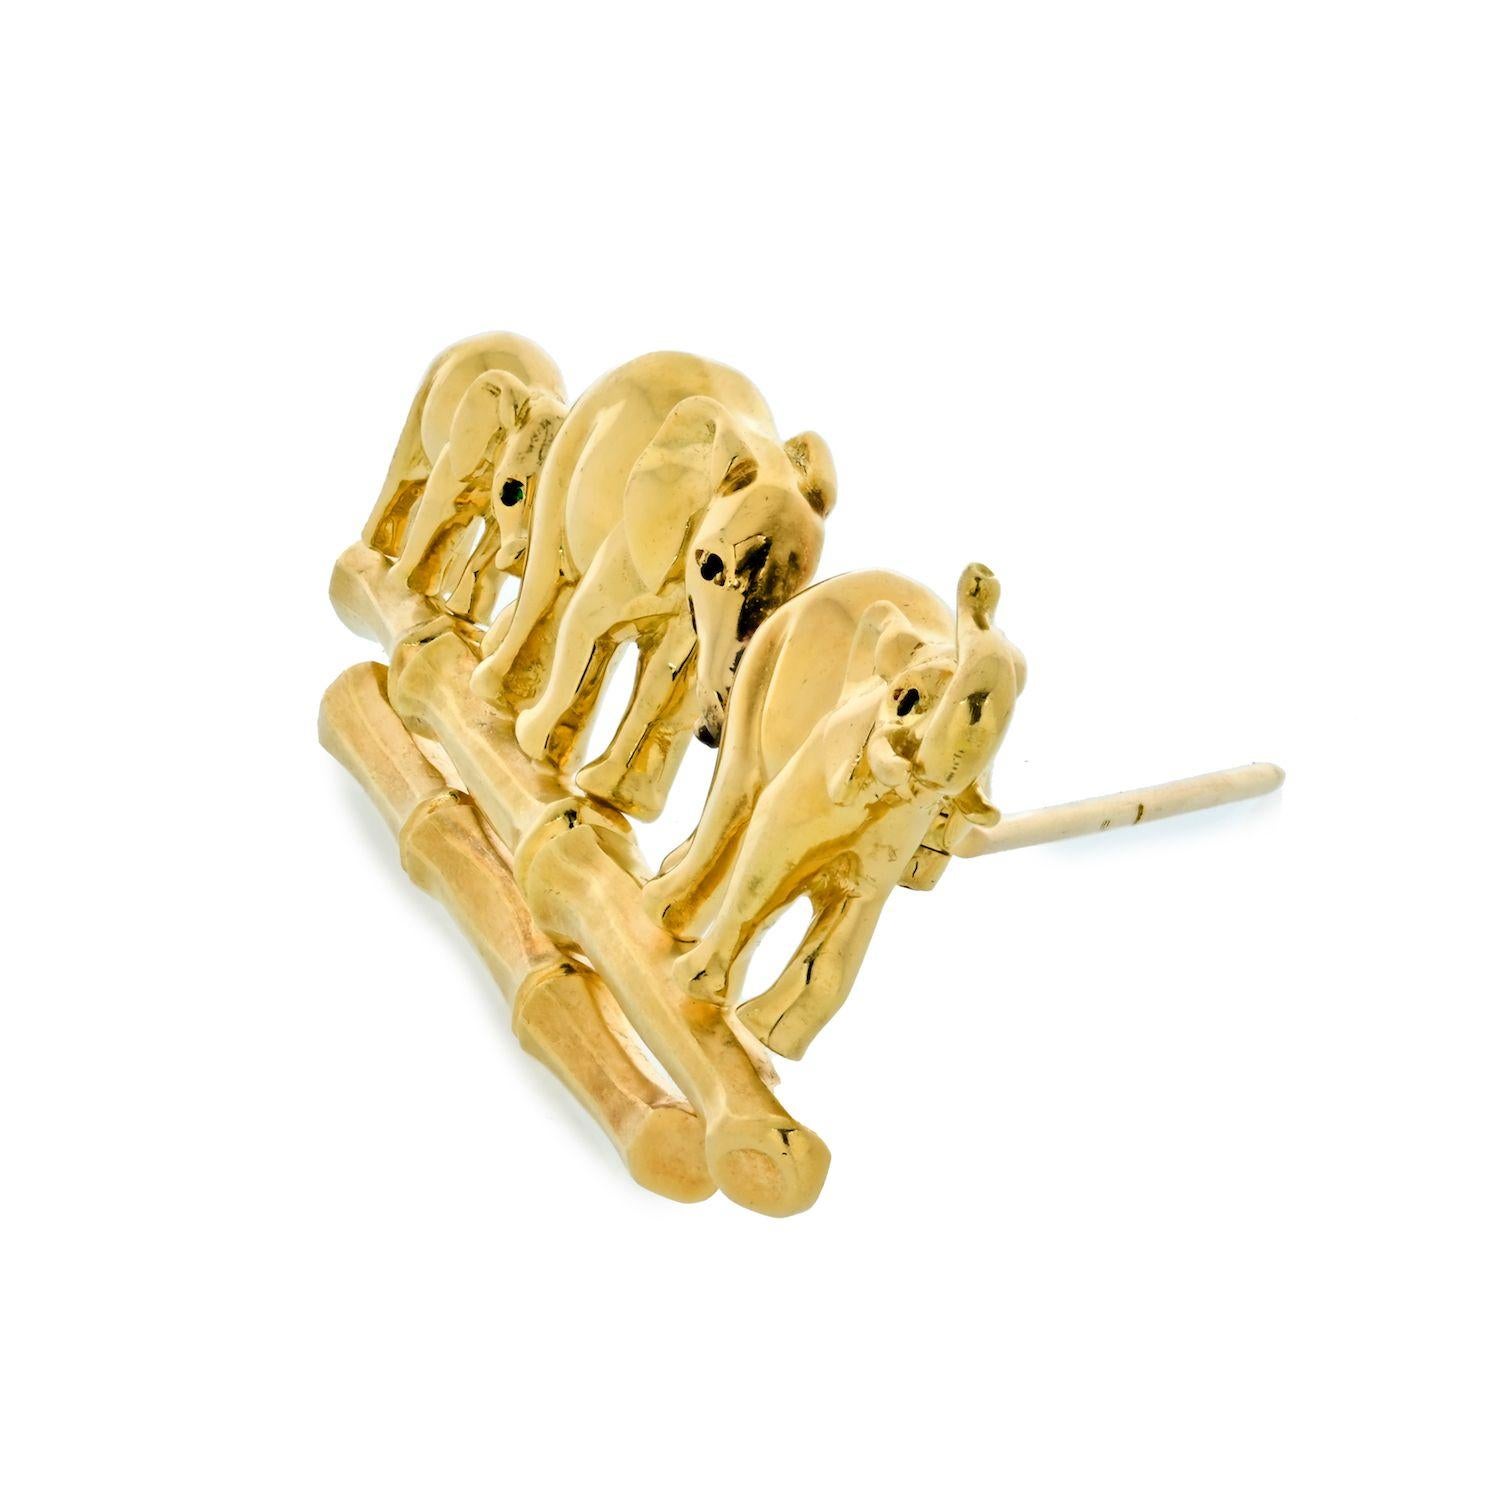 A lust-worthy piece from the House of Cartier, the Elephant Family design is always in style. This brooch is made of yellow gold and displays a family of elephants walking in a procession line. Lastly, the adult elephants each have an eye made of